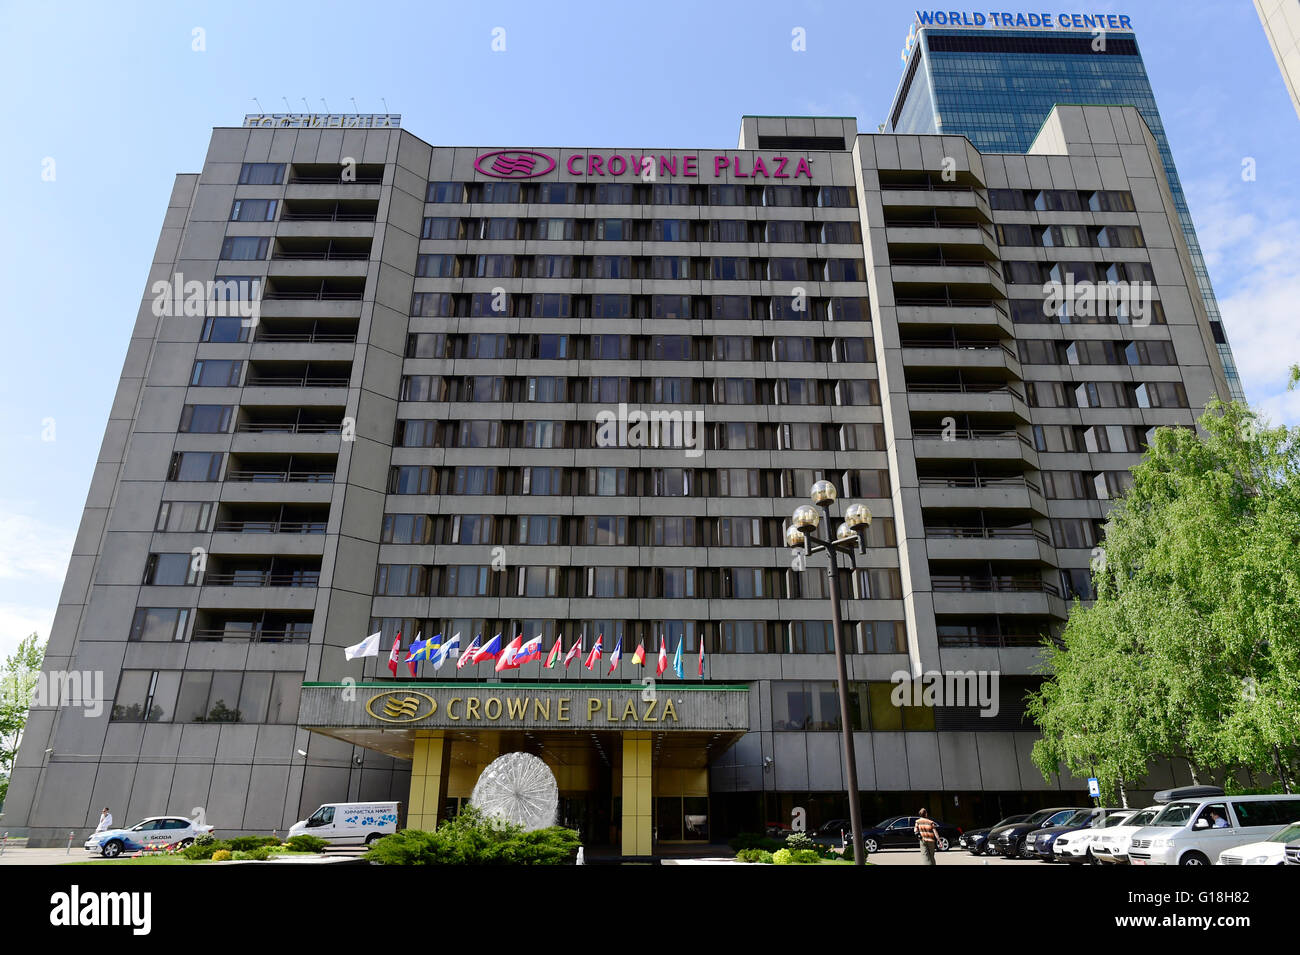 Moscow, Russian Federation. 10th May, 2016. The Crowne Plaza Hotel, where Czech ice hockey national team live, during the Ice Hockey World Championships in Moscow, Russia, on May 10, 2016. © Roman Vondrous/CTK Photo/Alamy Live News Stock Photo